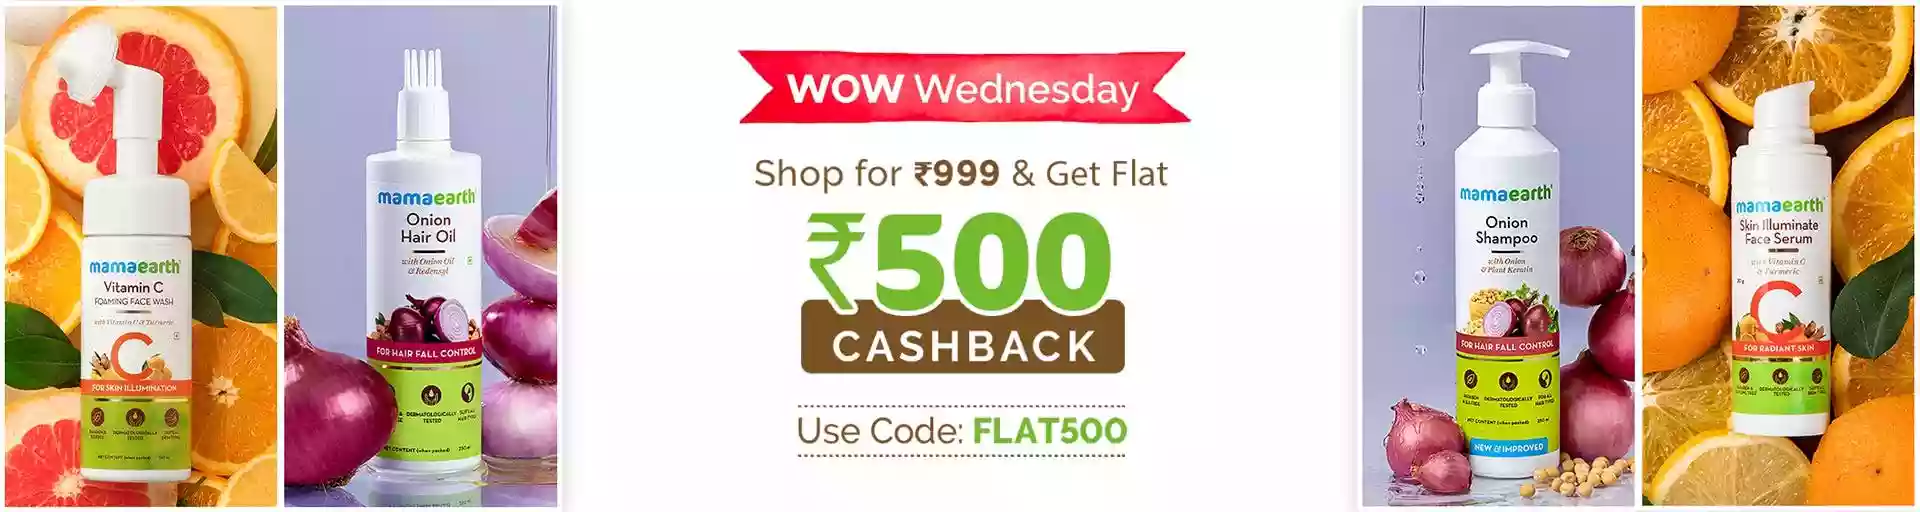 Mamaearth Wow Wednesday Offer Shop for Rs.999 and Get Rs.500 Cashback